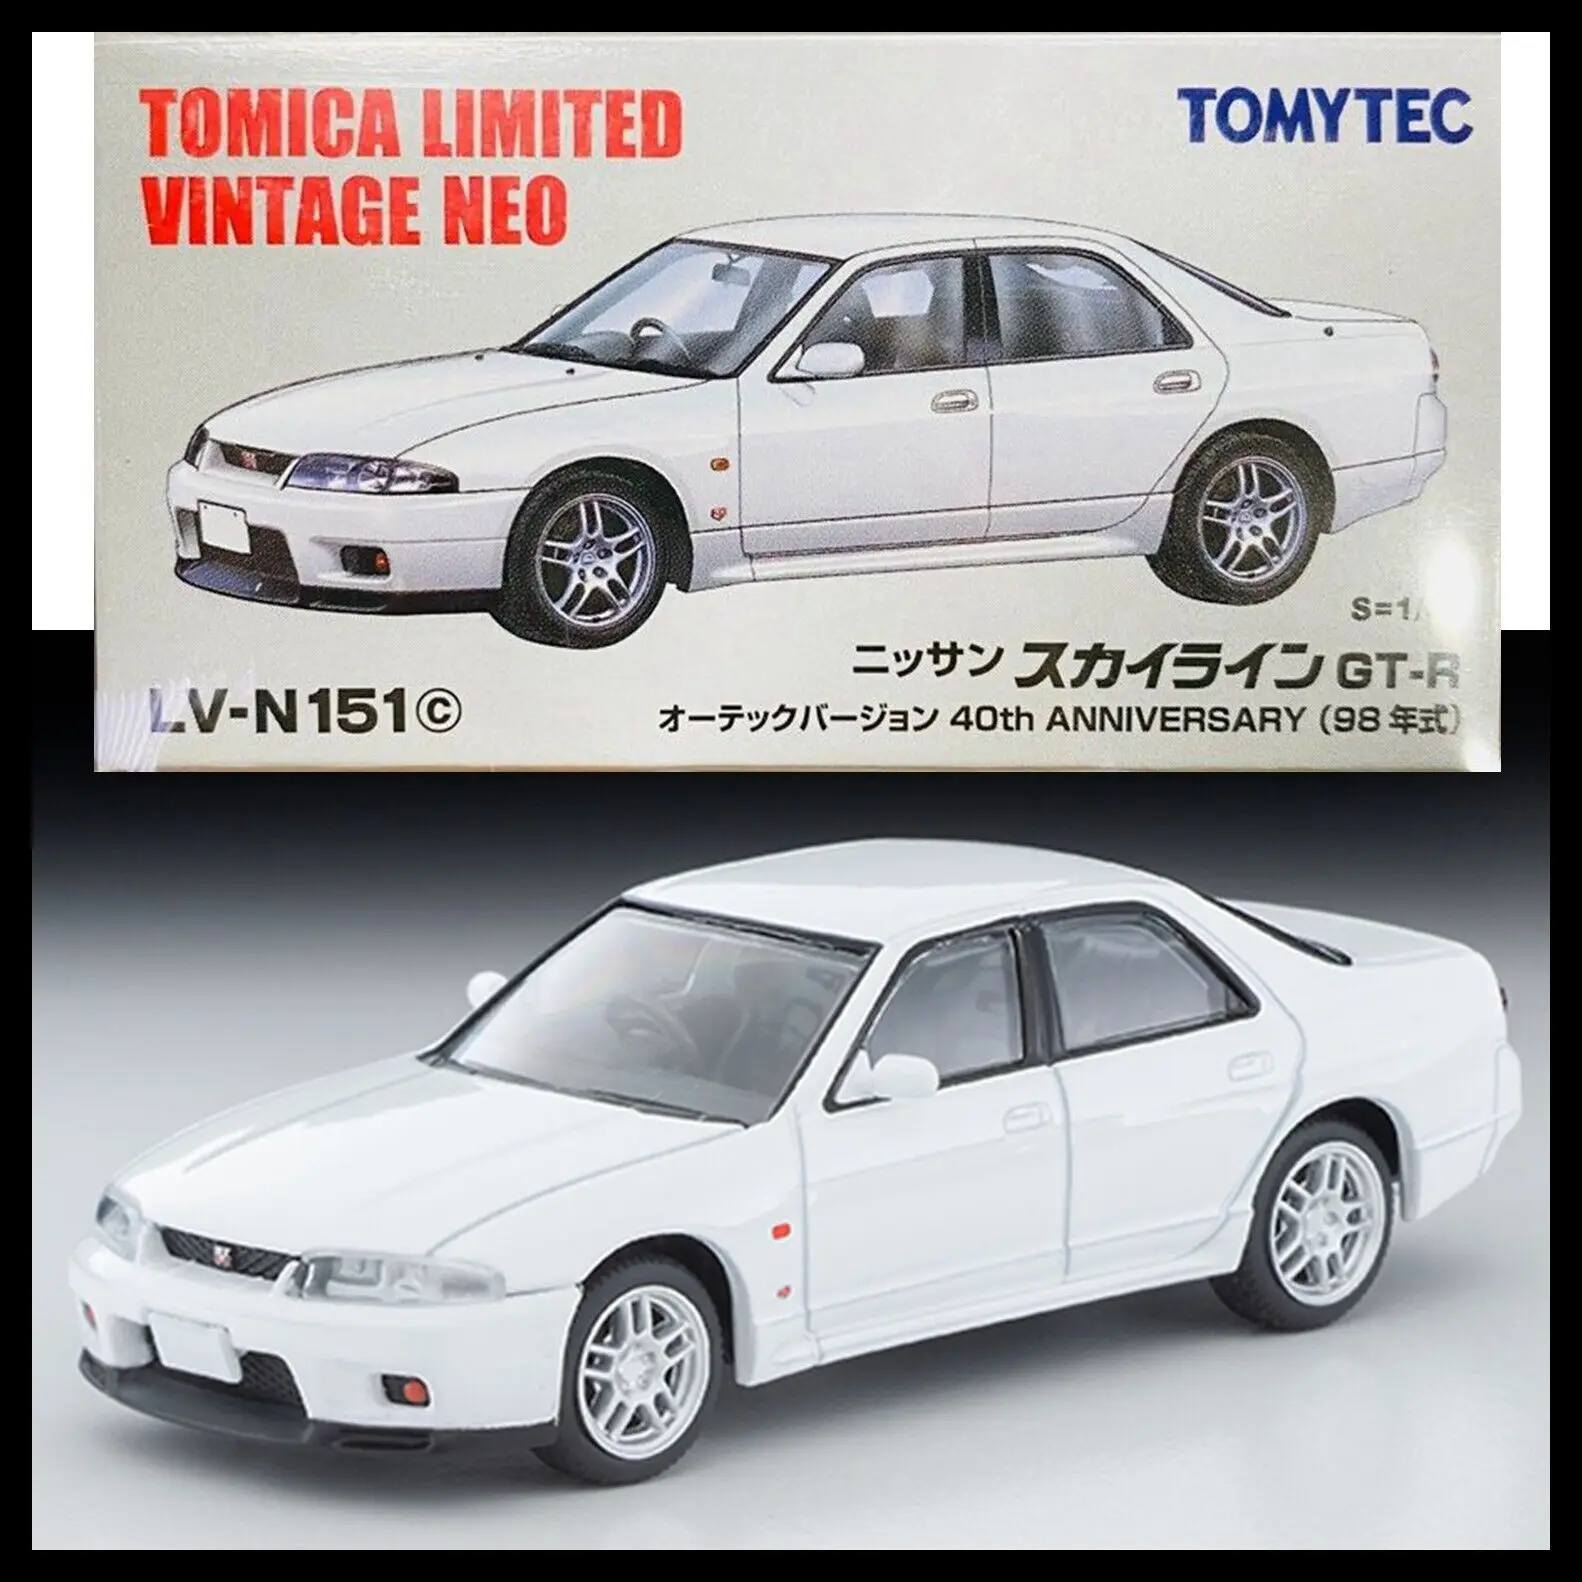 

Tomica Limited Vintage Neo Tomytec LV-N151c Skyline GT-R R33 Aute DieCast Model Car Collection Limited Edition Hobby Toys